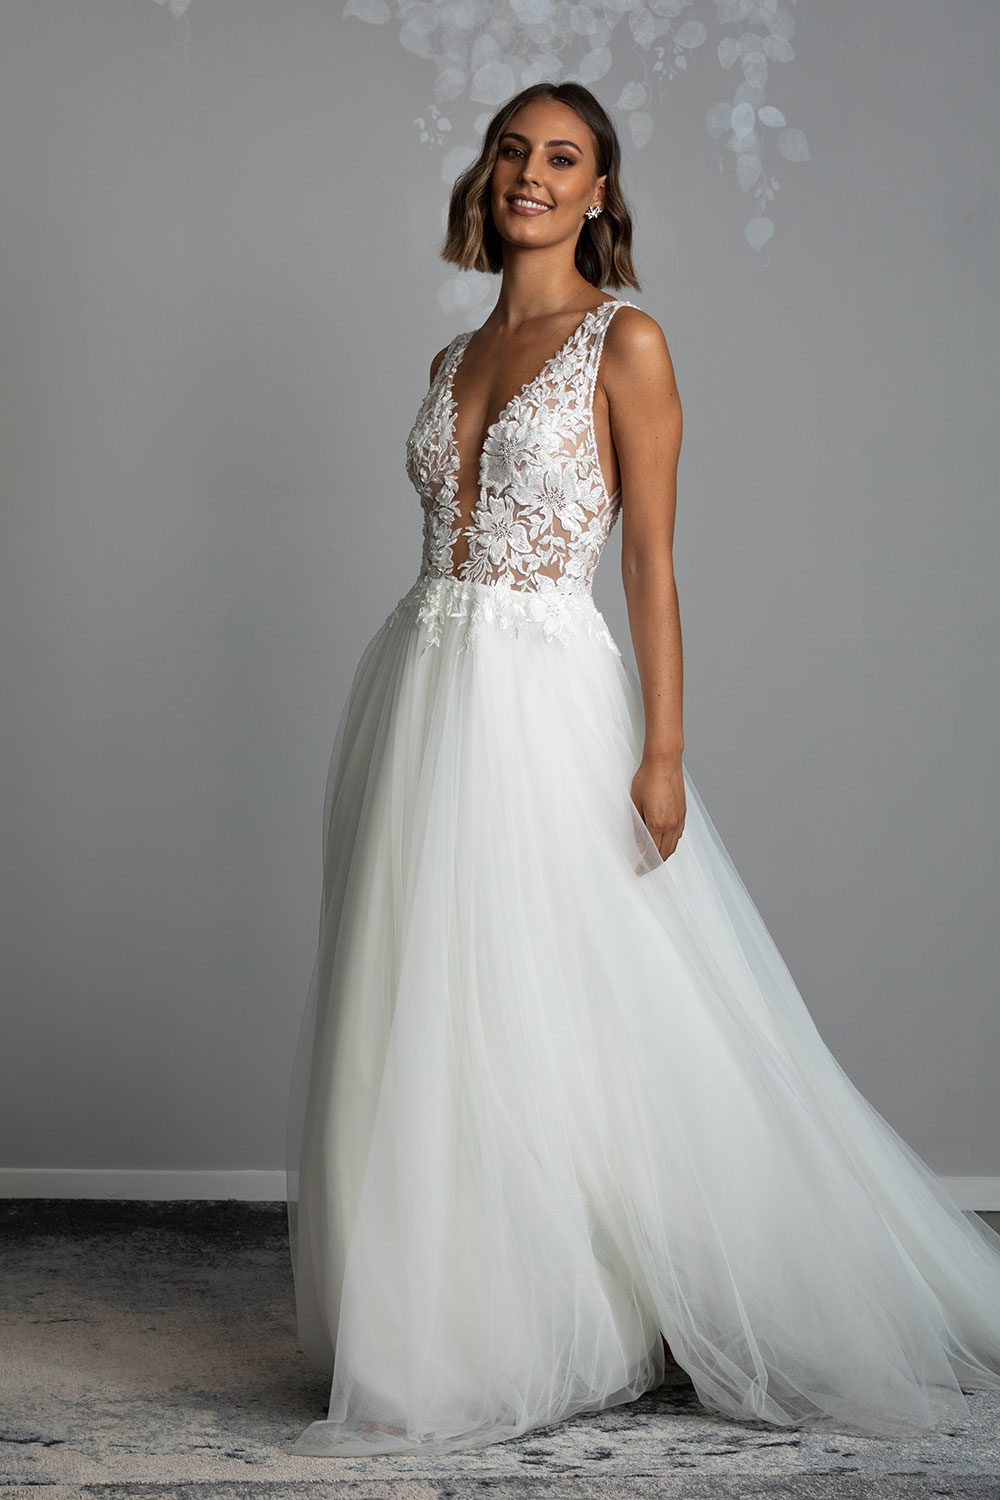 Tia Wedding gown from Vinka Design - This dreamy sculpted wedding dress has a deep V-shaped illusion neckline with beaded floral lace and an open back. The skirt has layers of soft tulle that glide with movement. Model walking showing movement in the soft tulle skirt